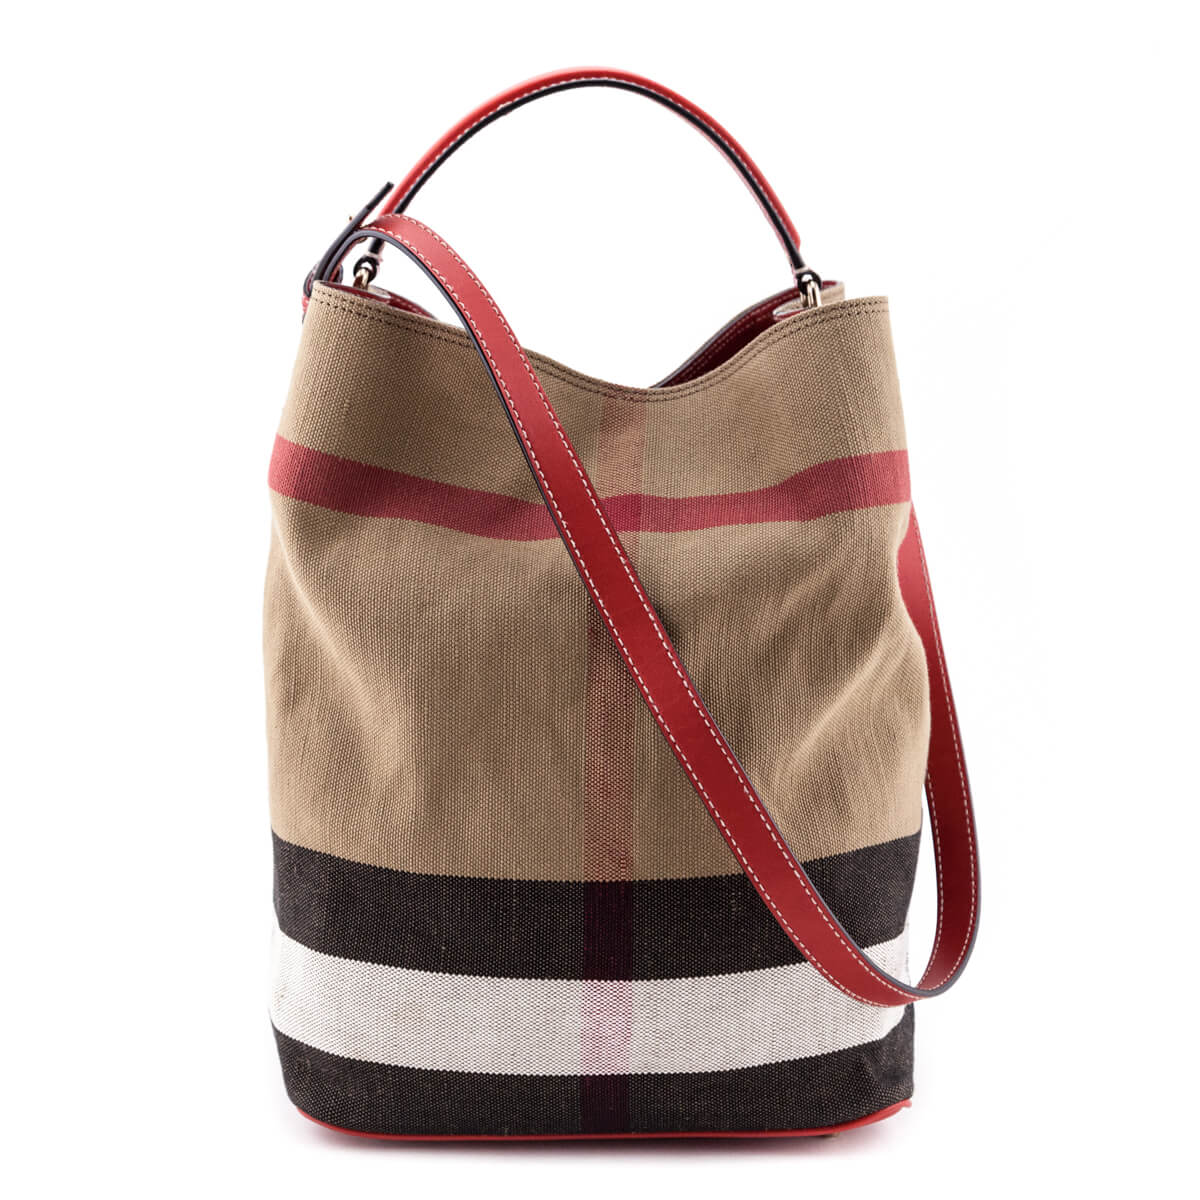 Burberry, Bags, Authentic Burberry Mega Check Canvas Bucket Large  Shoulder Tote Bag